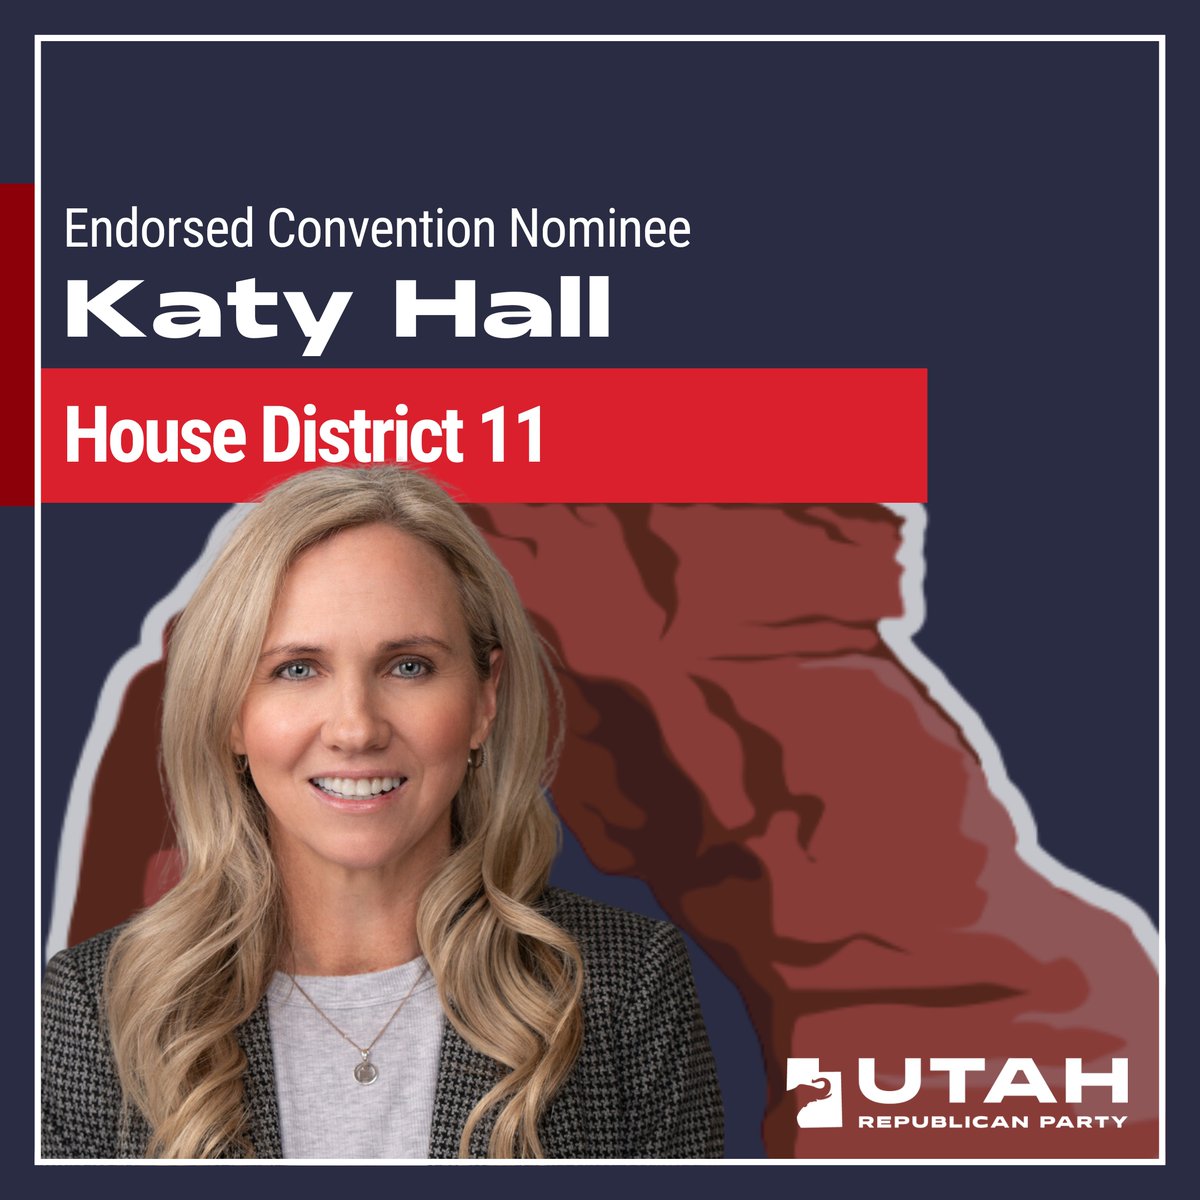 Katy Hall is the UT GOP's Endorsed Convention Nominee for House District 11! Congratulations Katy!